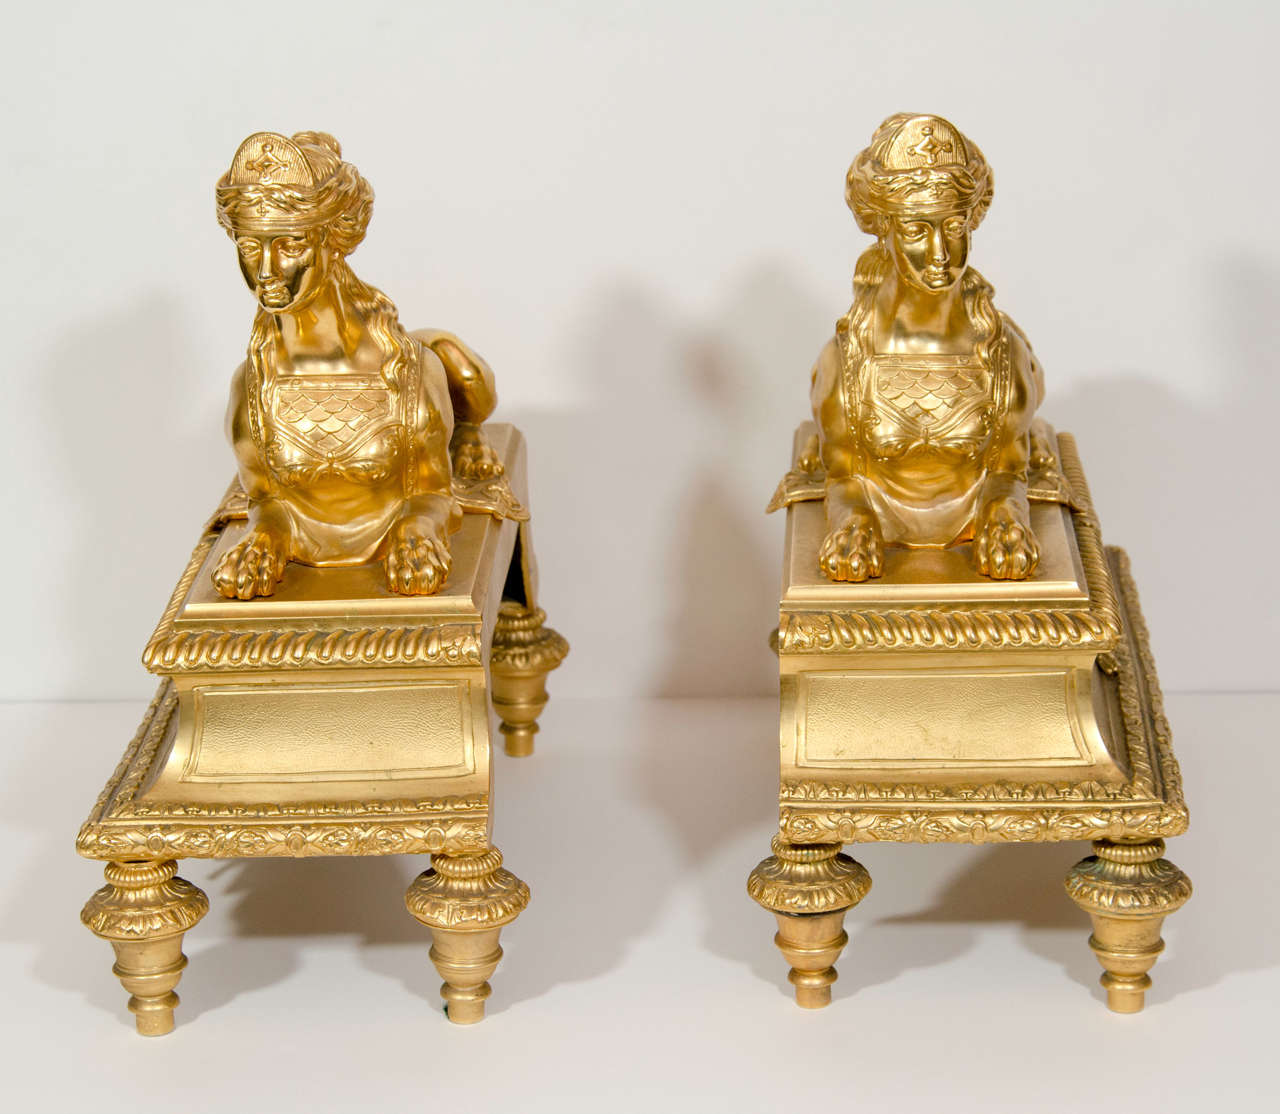 Pair of Rare & Large Antique French Louis XVI gilt bronze figural Andirons of fine quality embellished with reclining sphinxes, 19th Century.